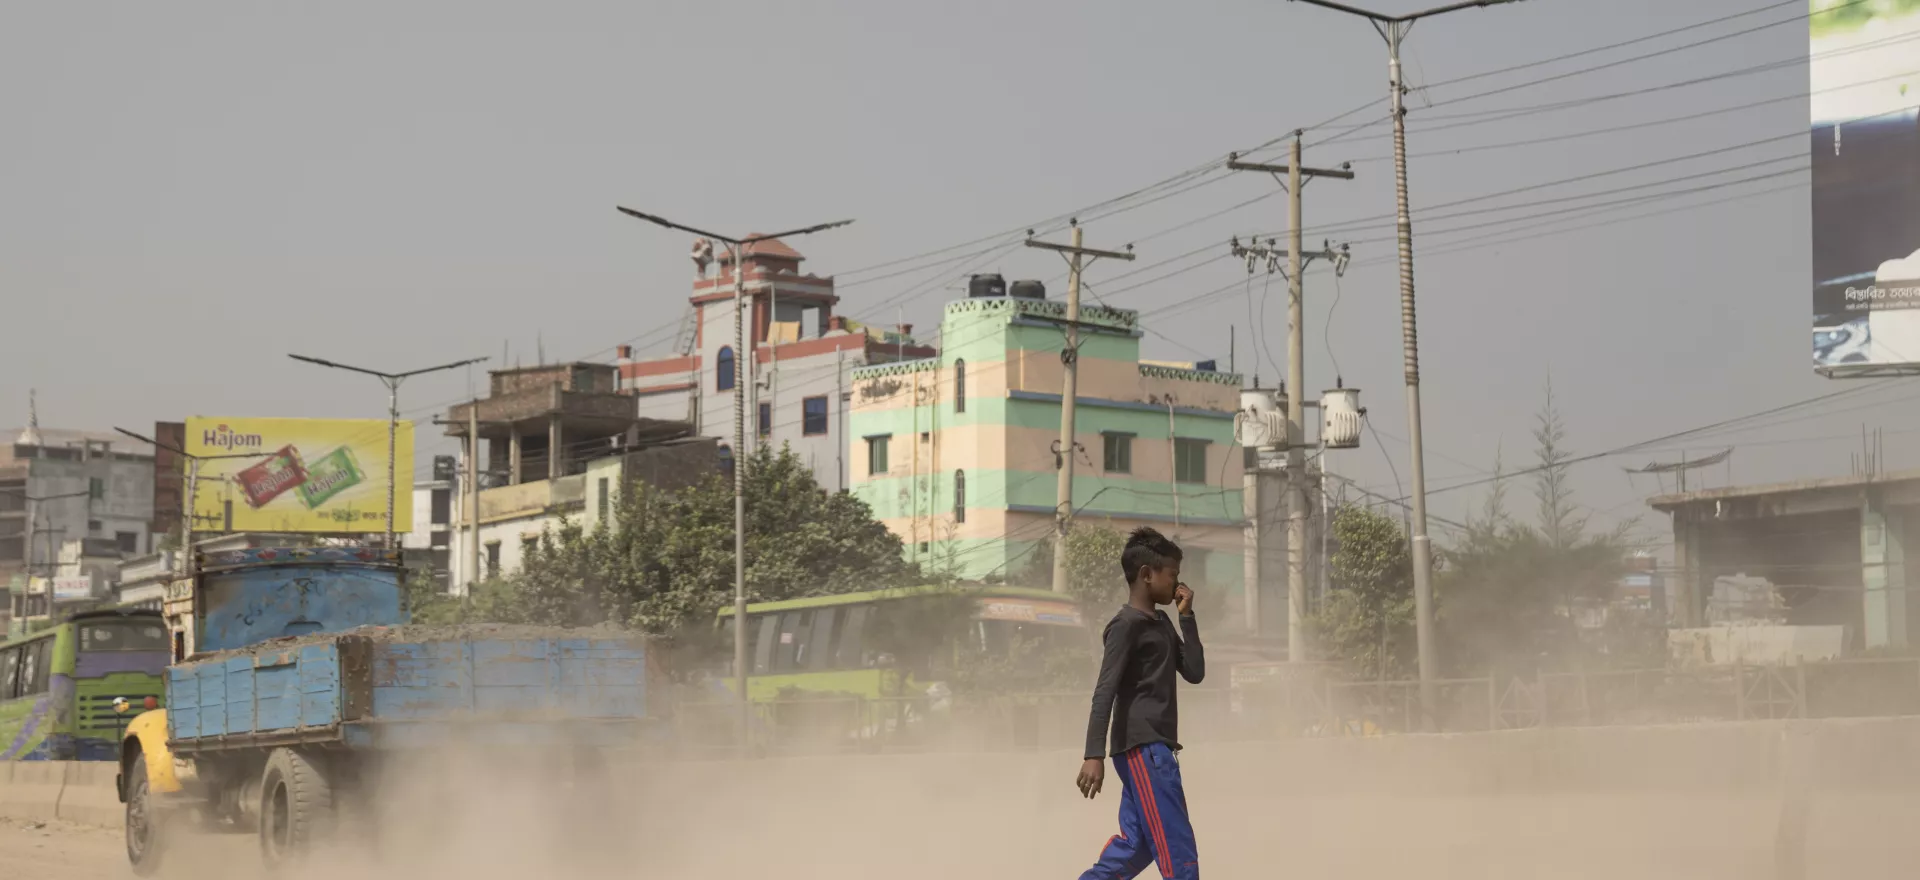 A child worker is crossing a severely polluted road in Dhaka, Bangladesh.